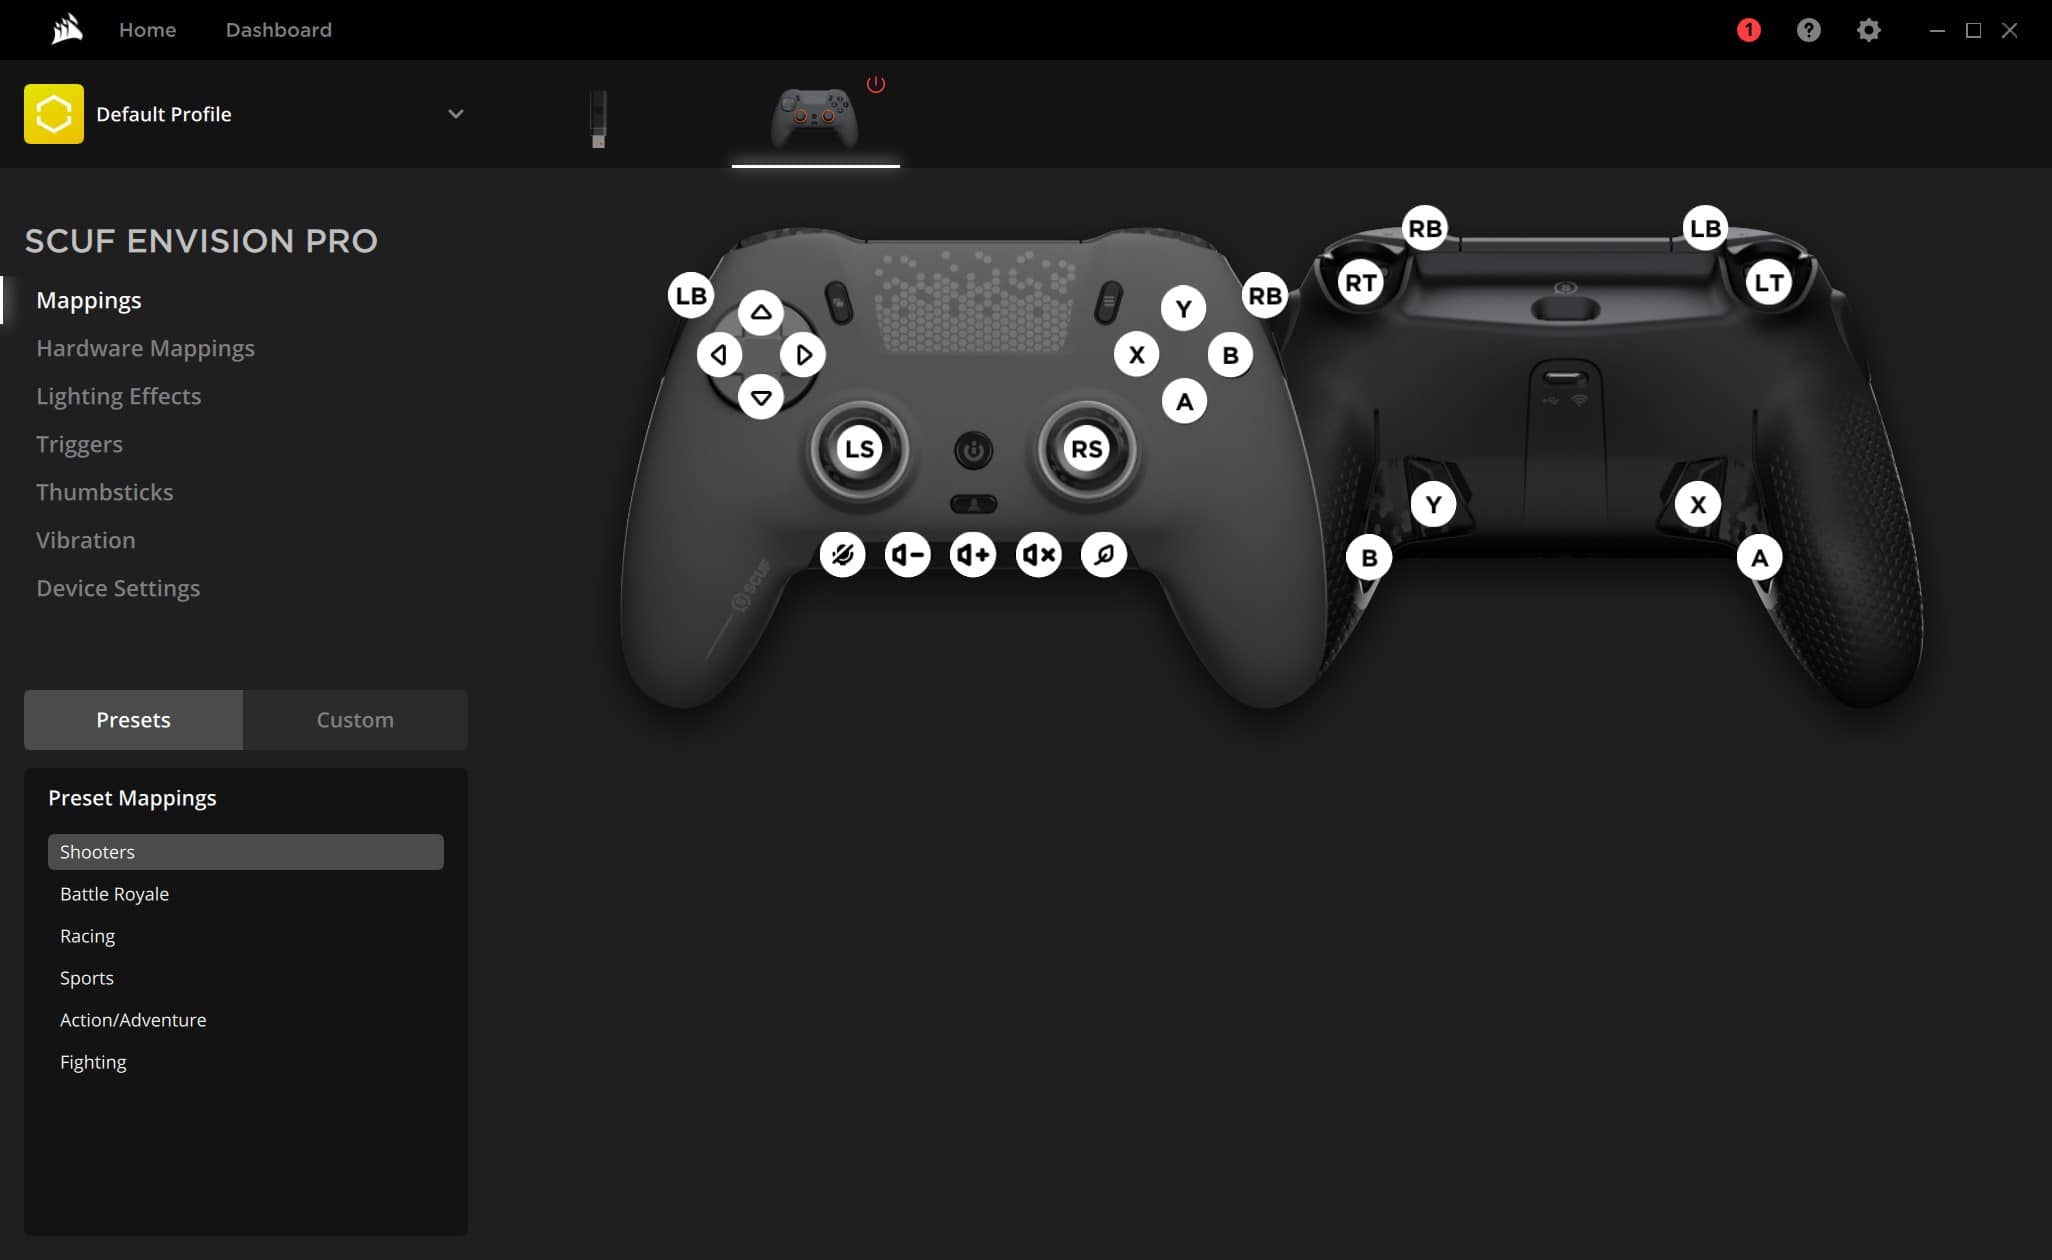 SCUF Envision Pro iCUE software button mapping